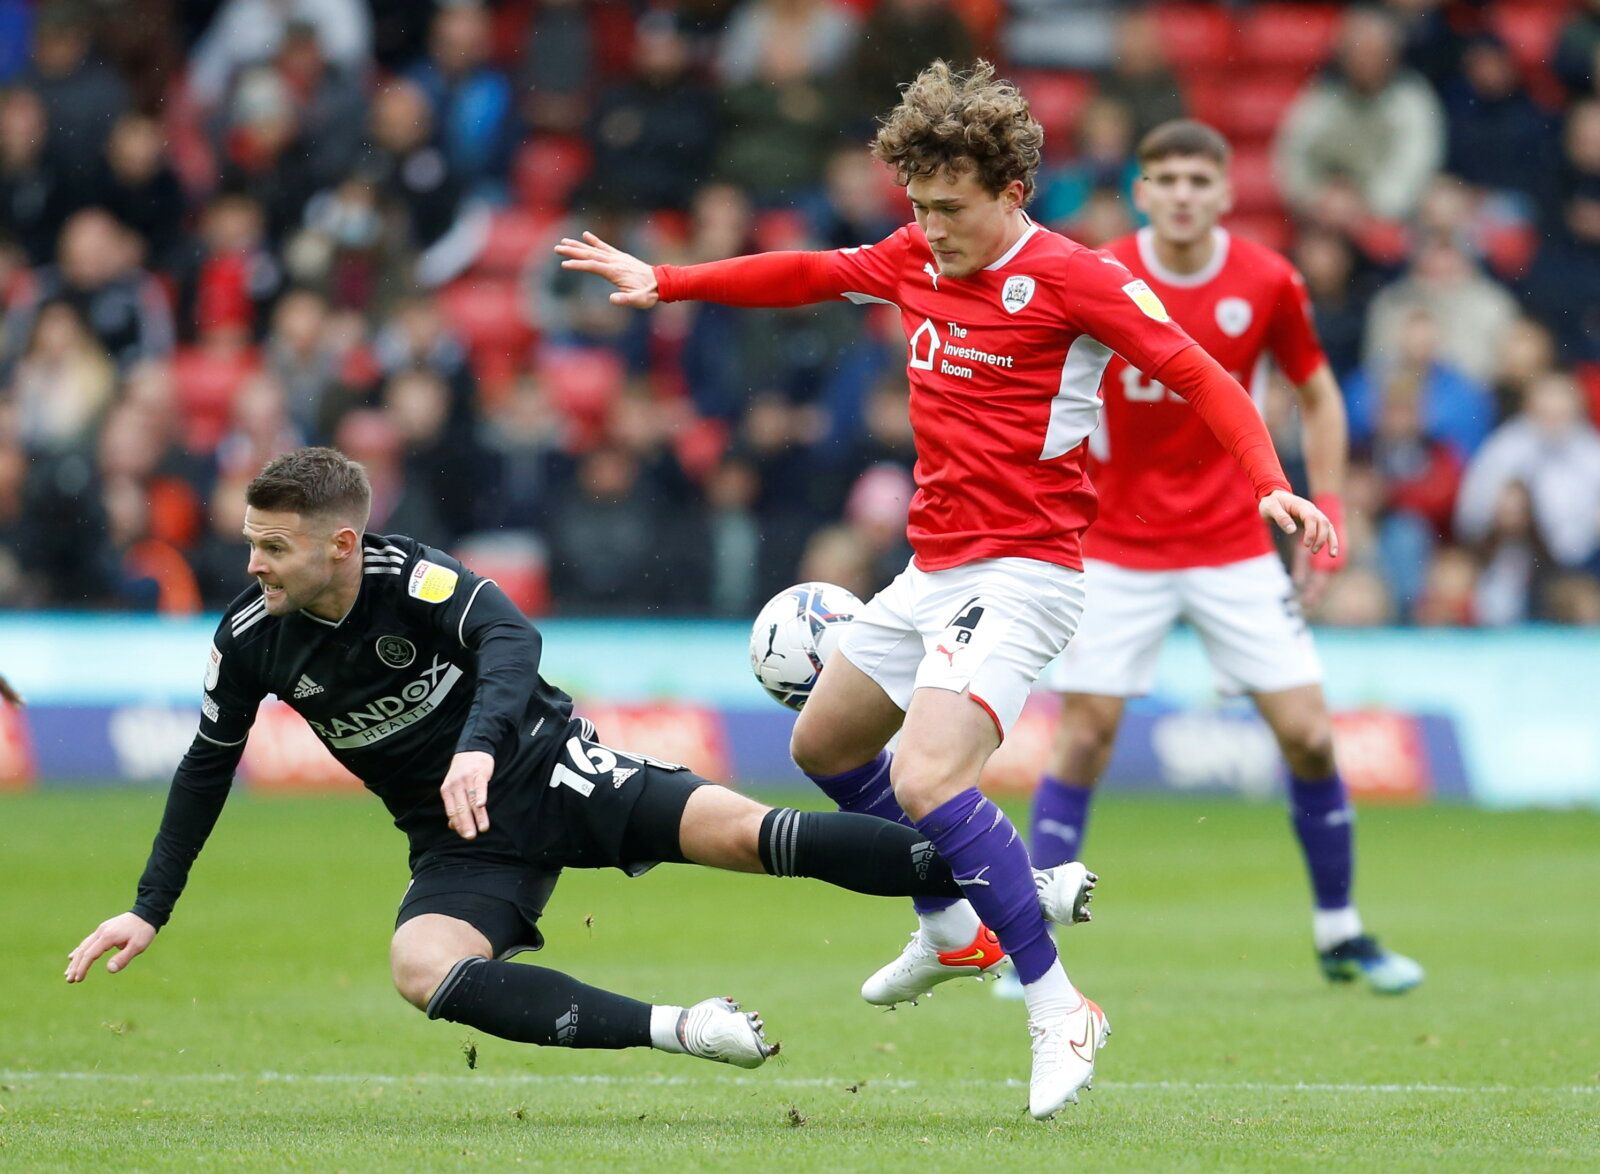 Soccer Football - Championship - Barnsley v Sheffield United - Oakwell, Barnsley, Britain - October 24, 2021 Sheffield United's Oliver Norwood and Barnsley's Callum Styles in action Action Images/Ed Sykes  EDITORIAL USE ONLY. No use with unauthorized audio, video, data, fixture lists, club/league logos or 